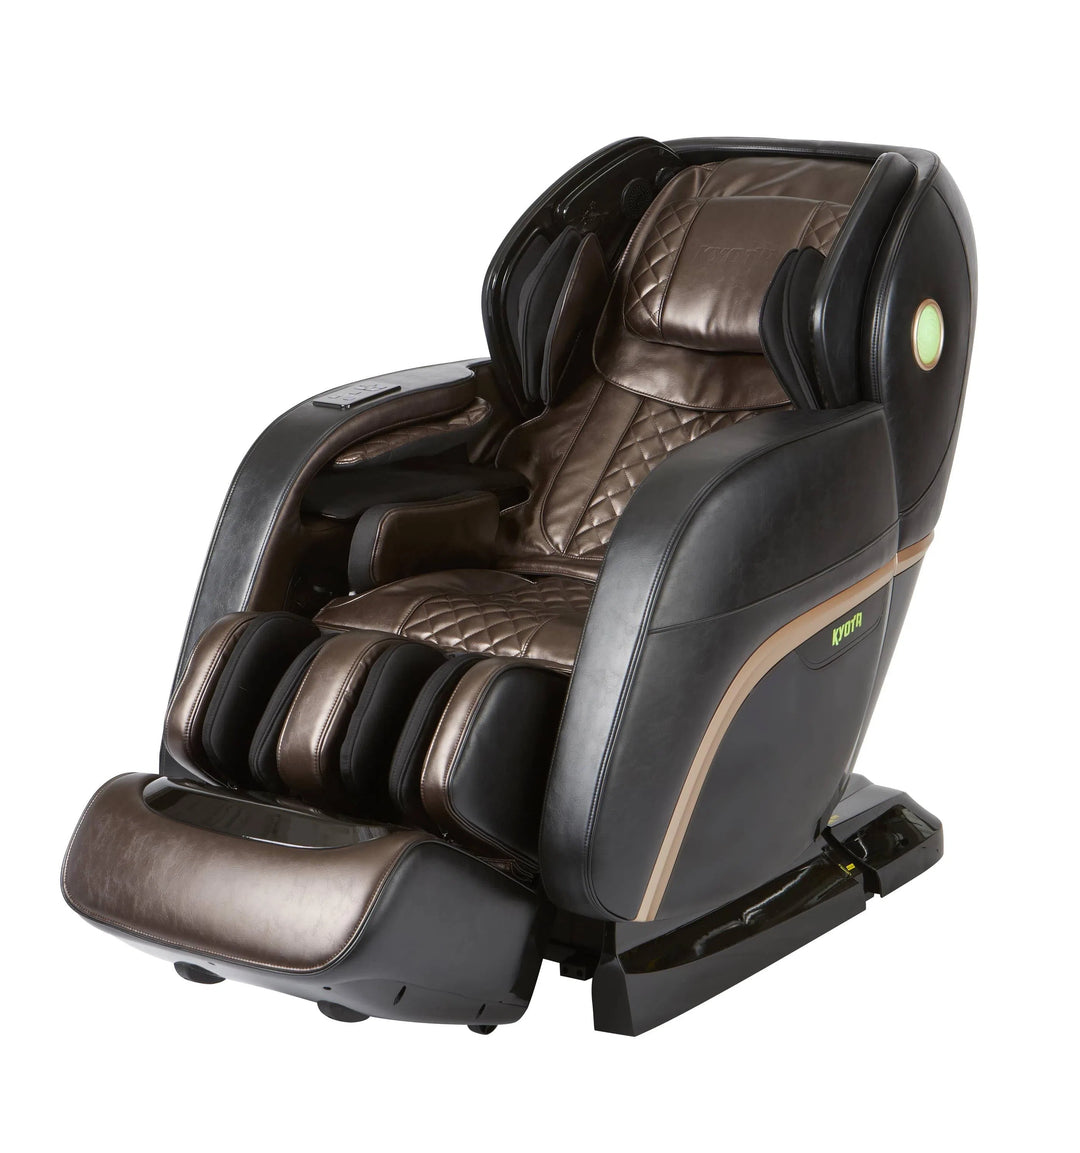 Kokoro 4D Full Body Massage Chair M888 Safe and Healthy Muscle Recovery, Physical Rehabilitation, and Ultimate Relaxation